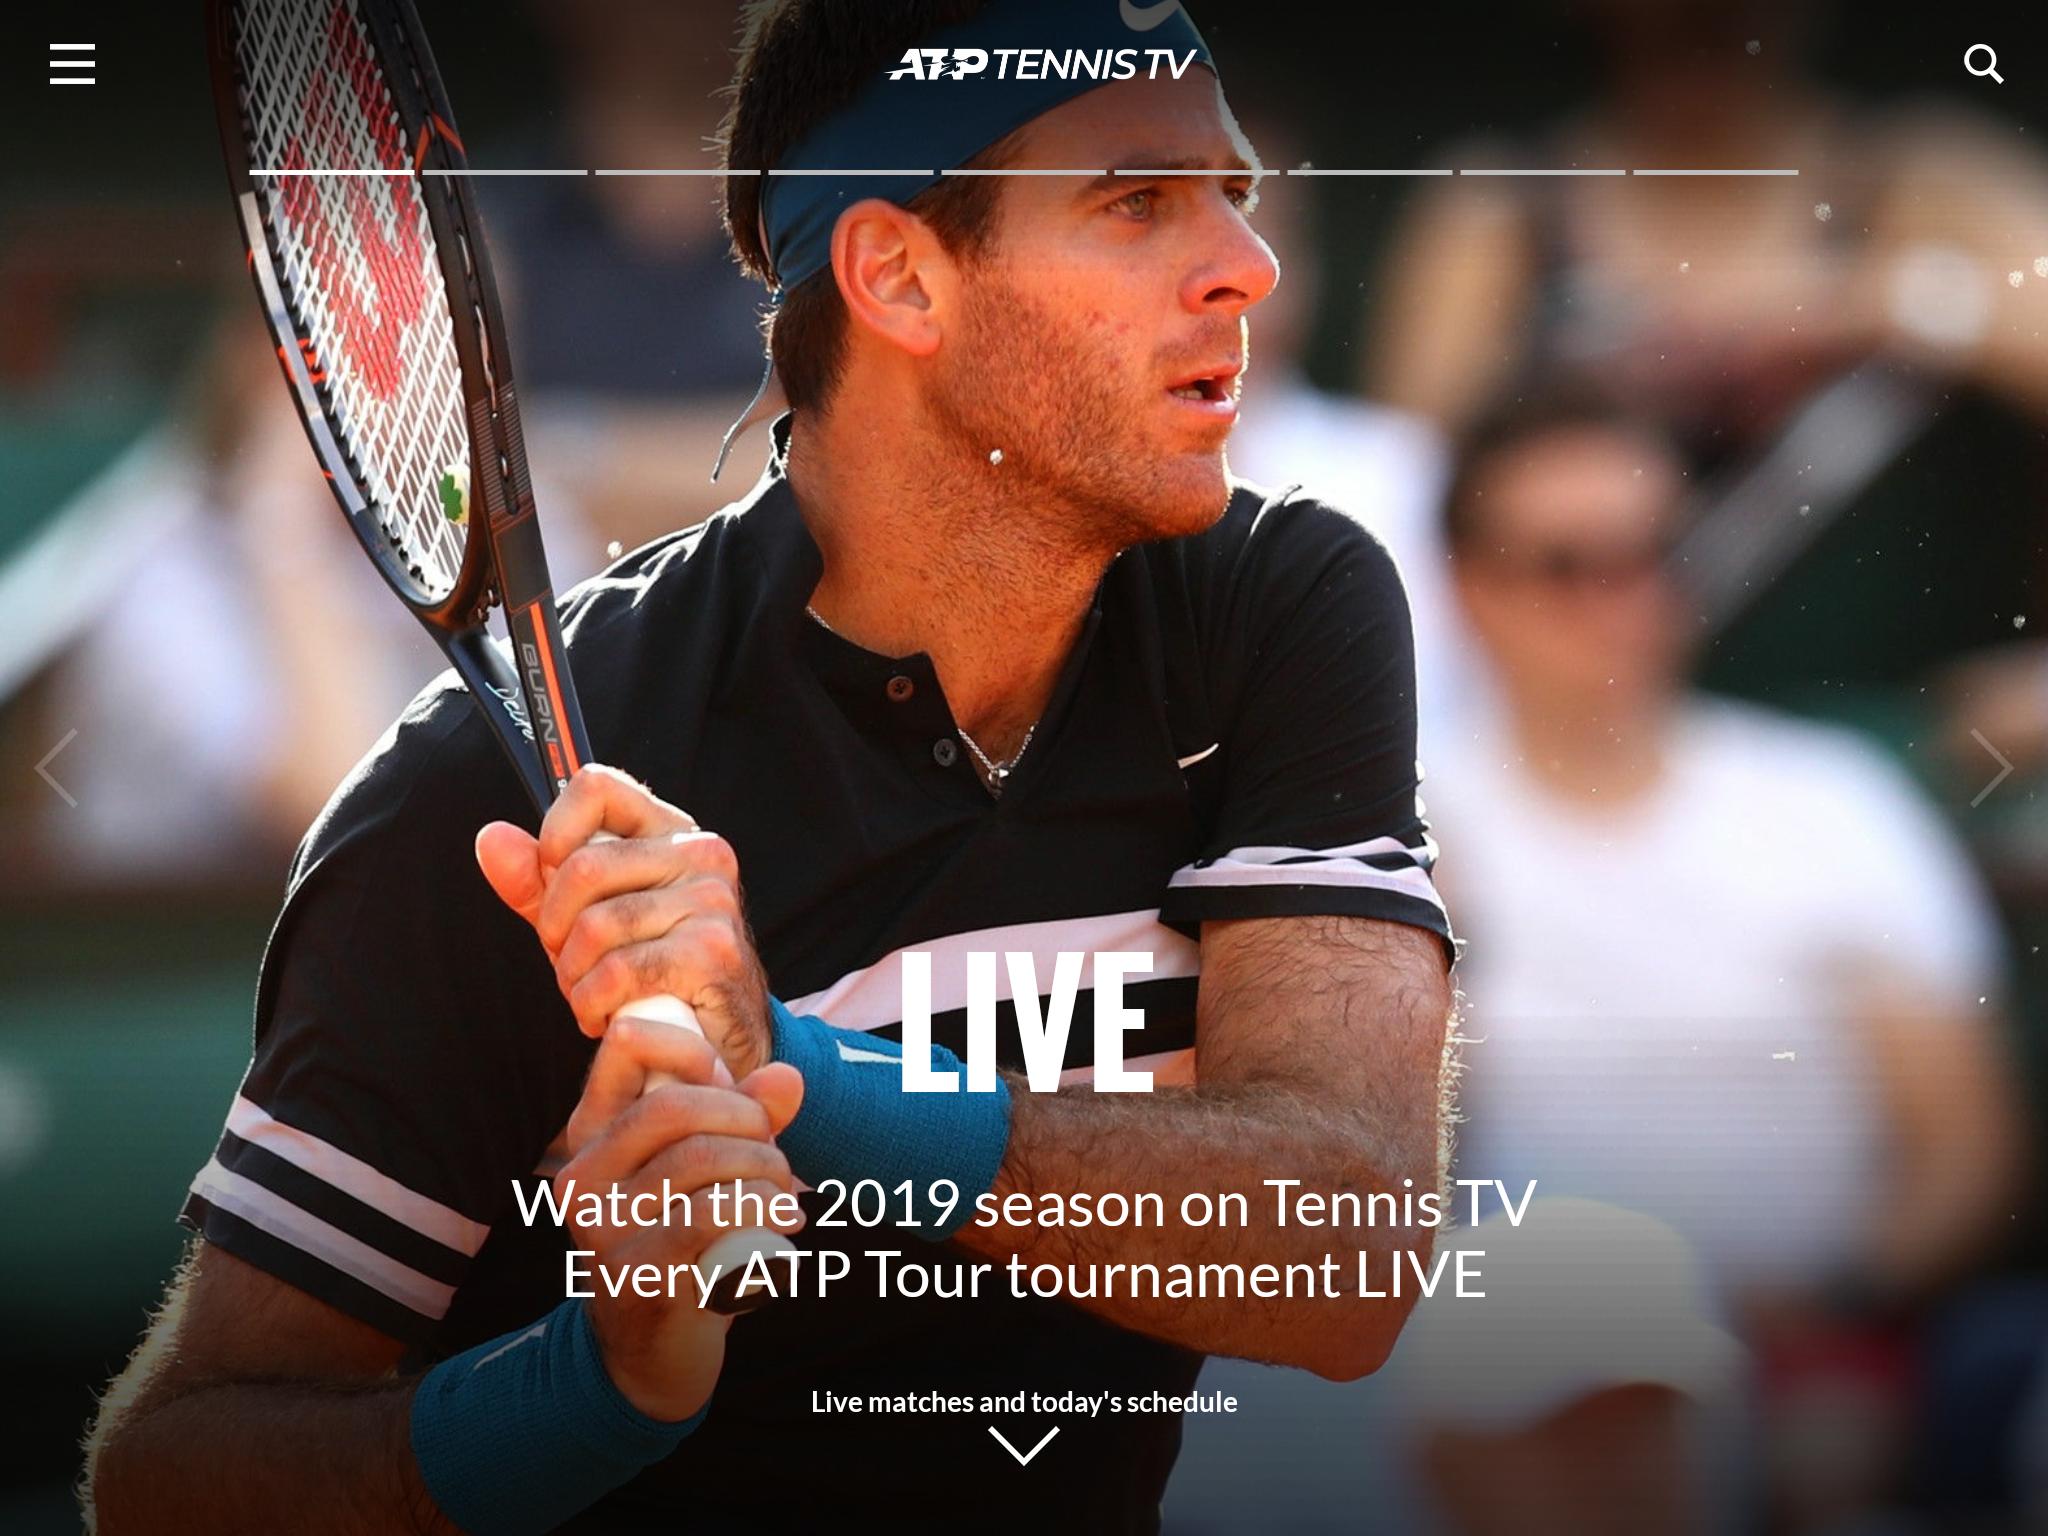 Tennis TV for Android - APK Download